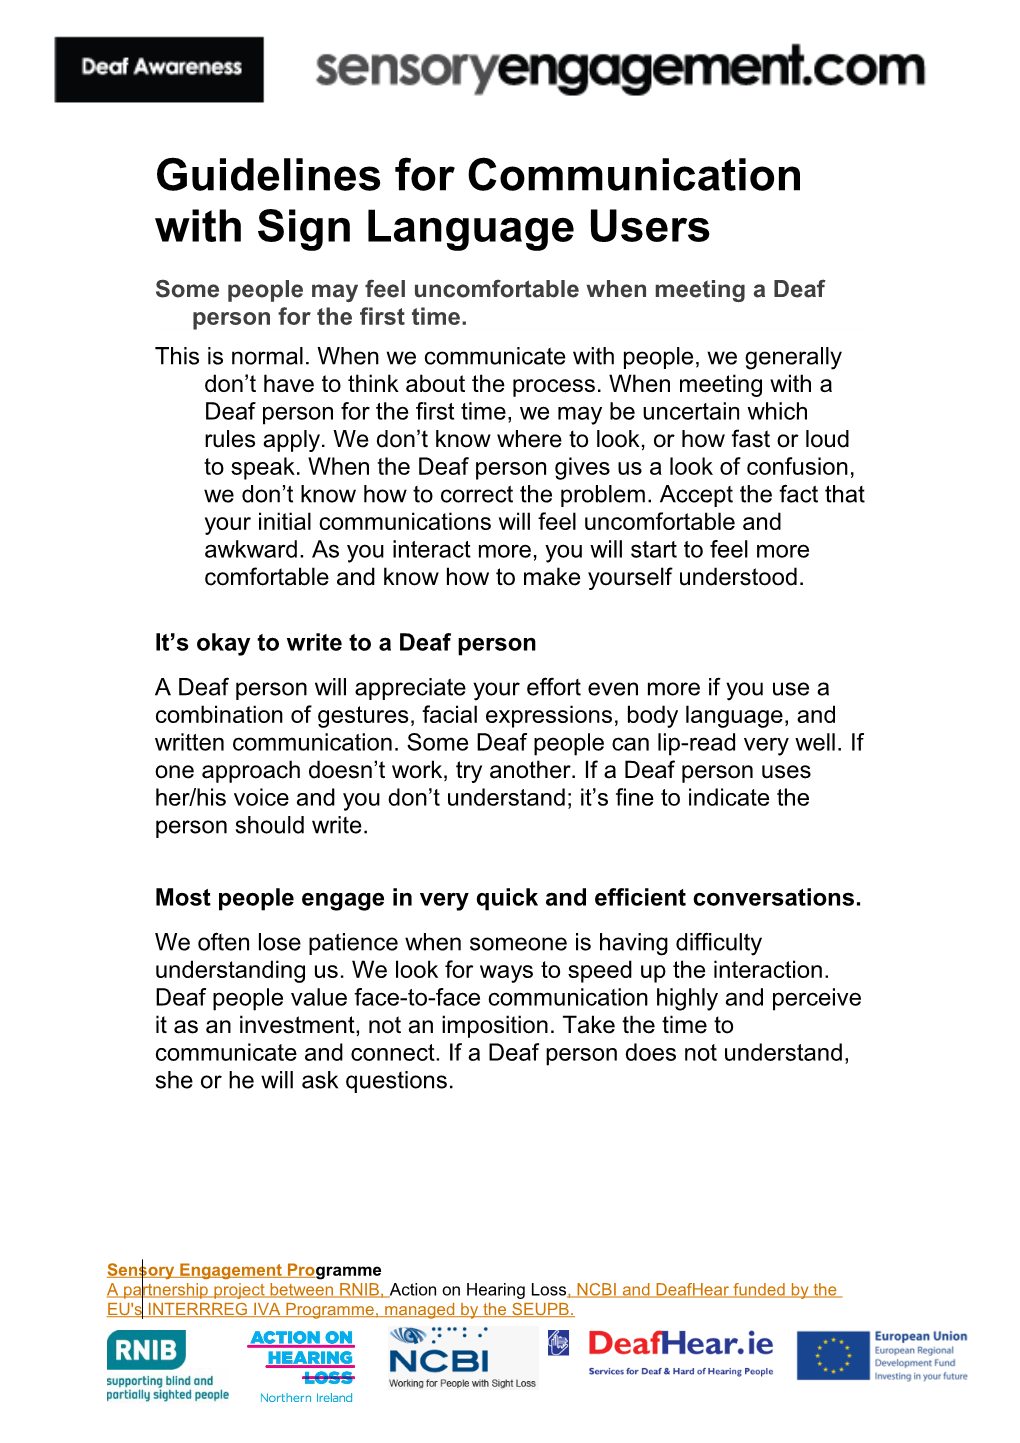 Guidelines for Communication with Sign Language Users